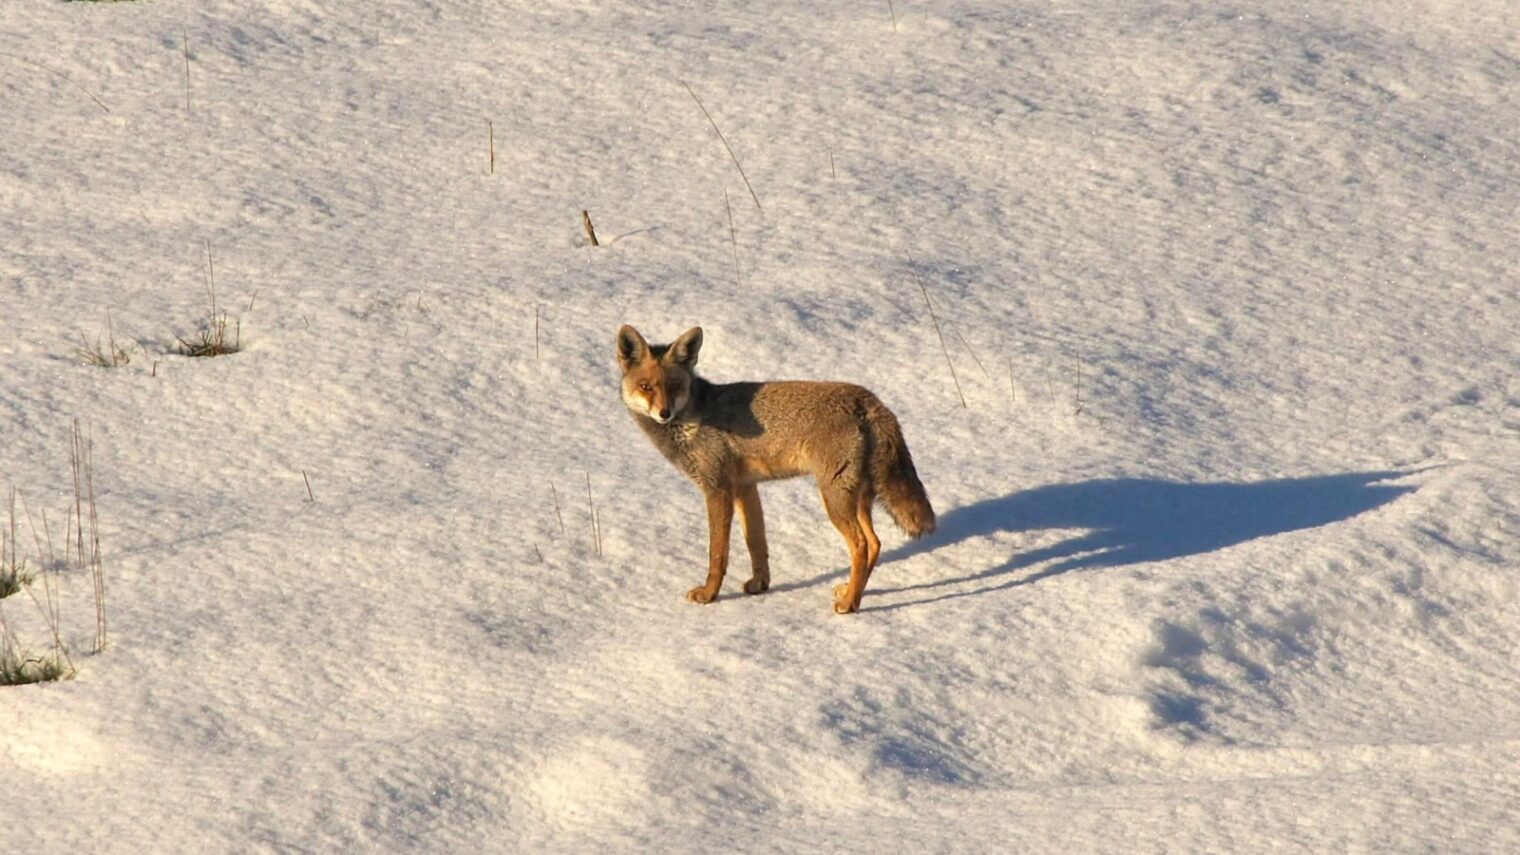 A fox in the Golan Heights. Photo by Meron Segev